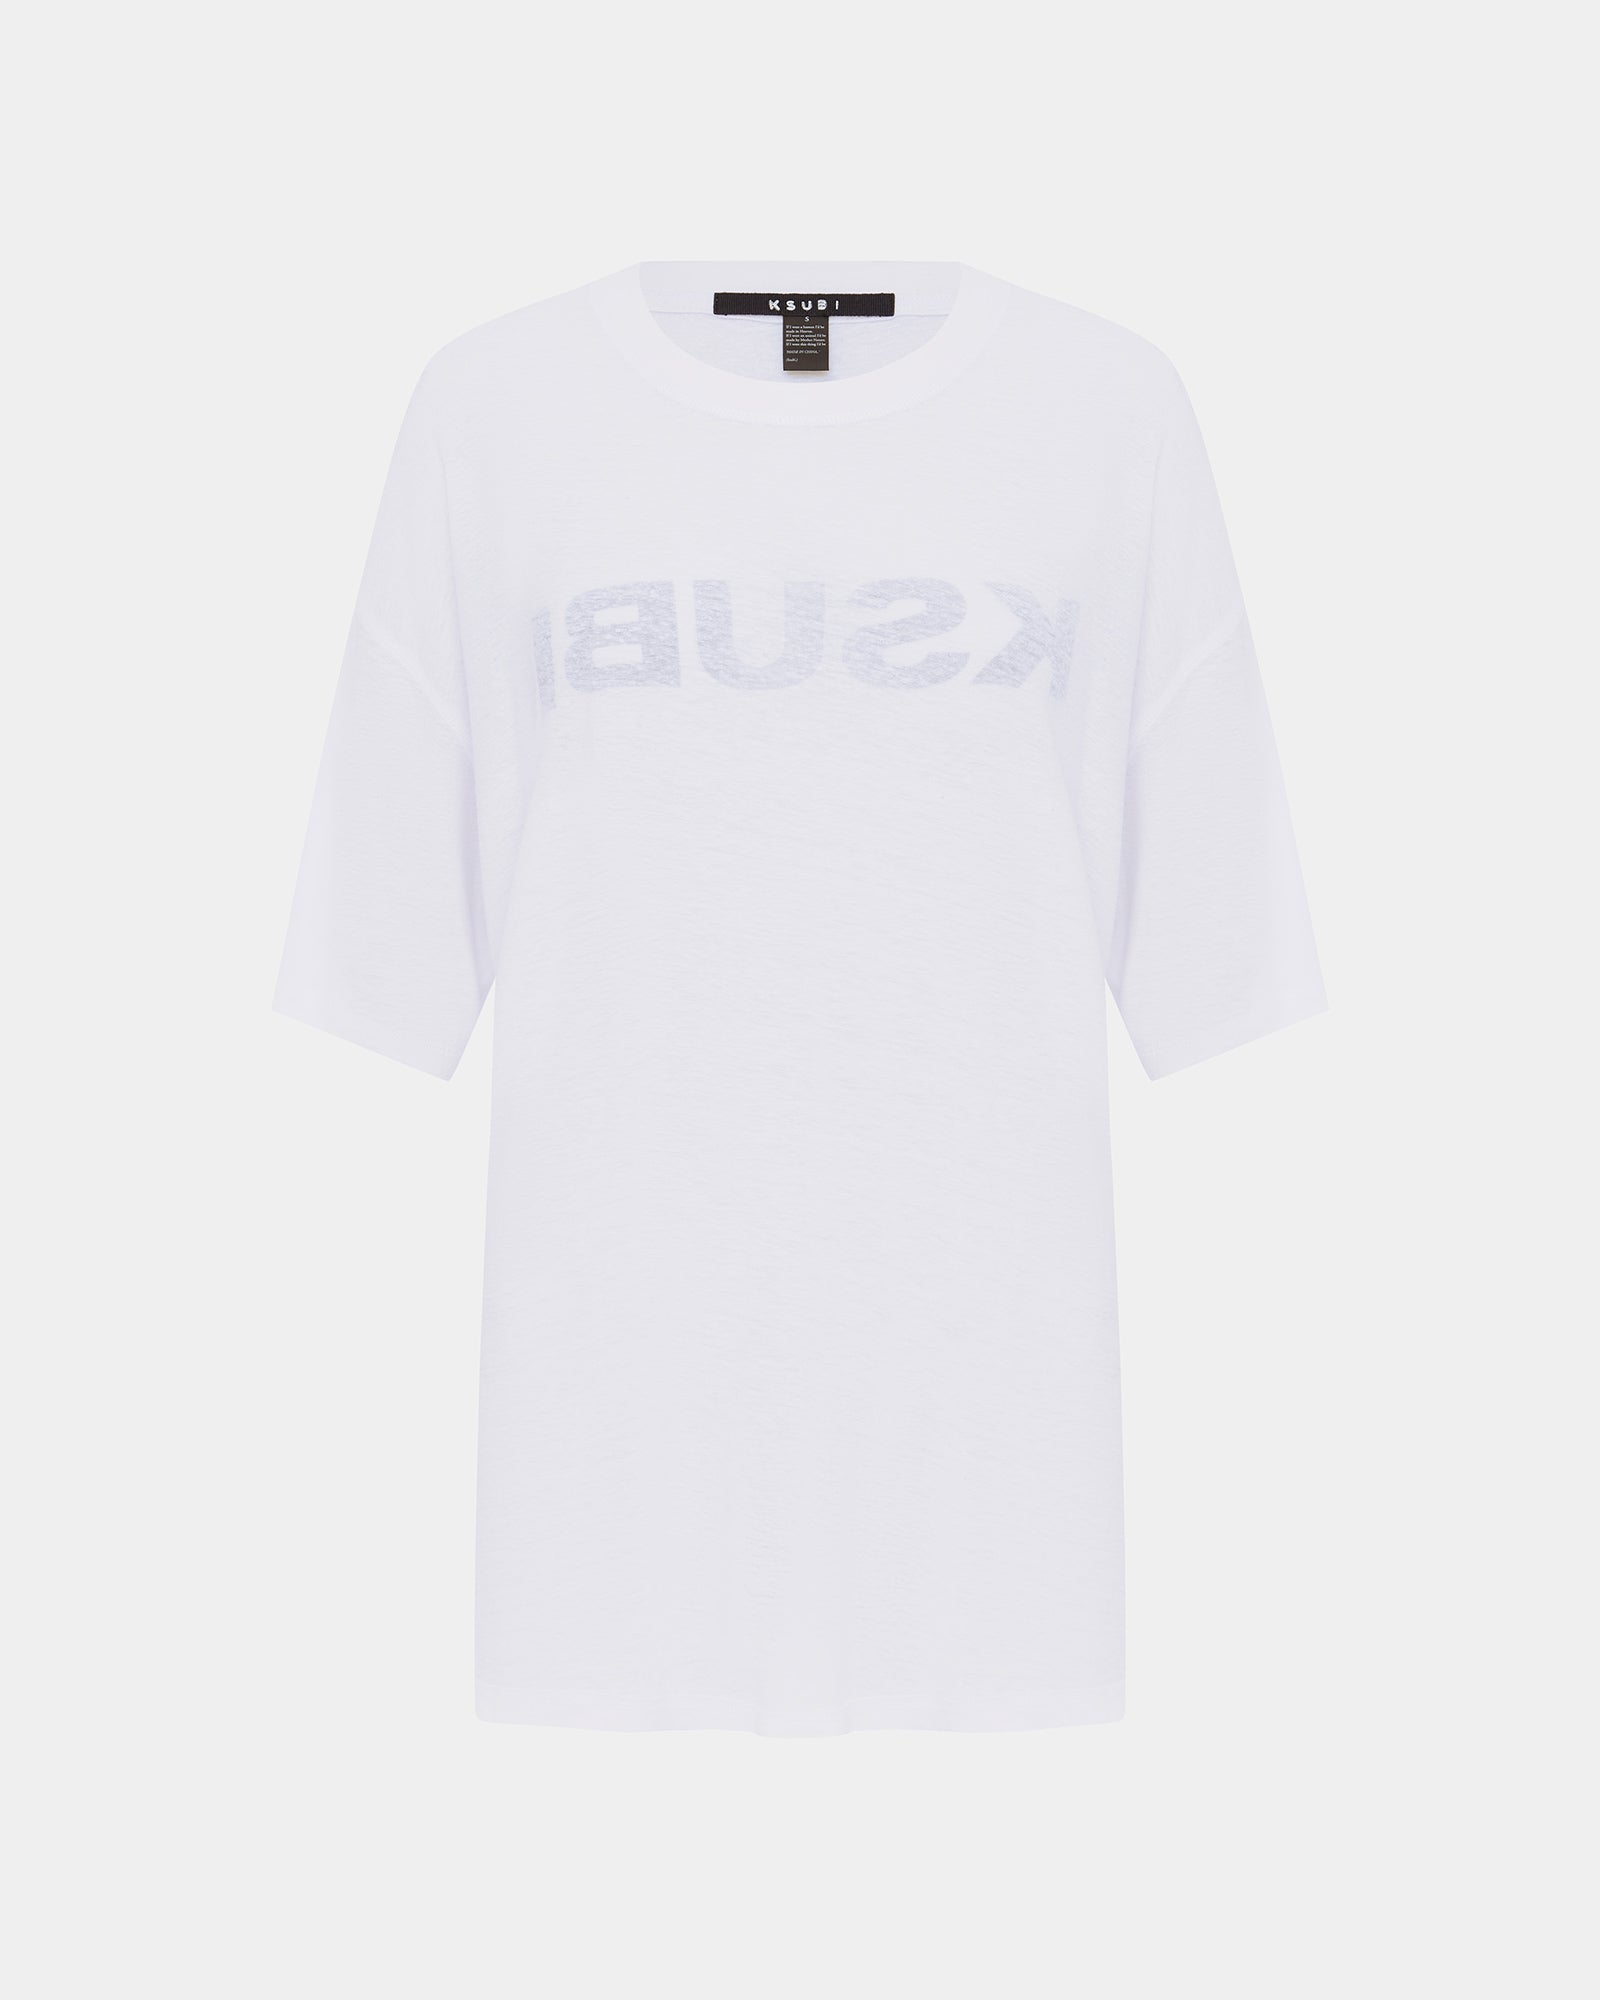 REVERSE IT OH G SS TEE WHITE